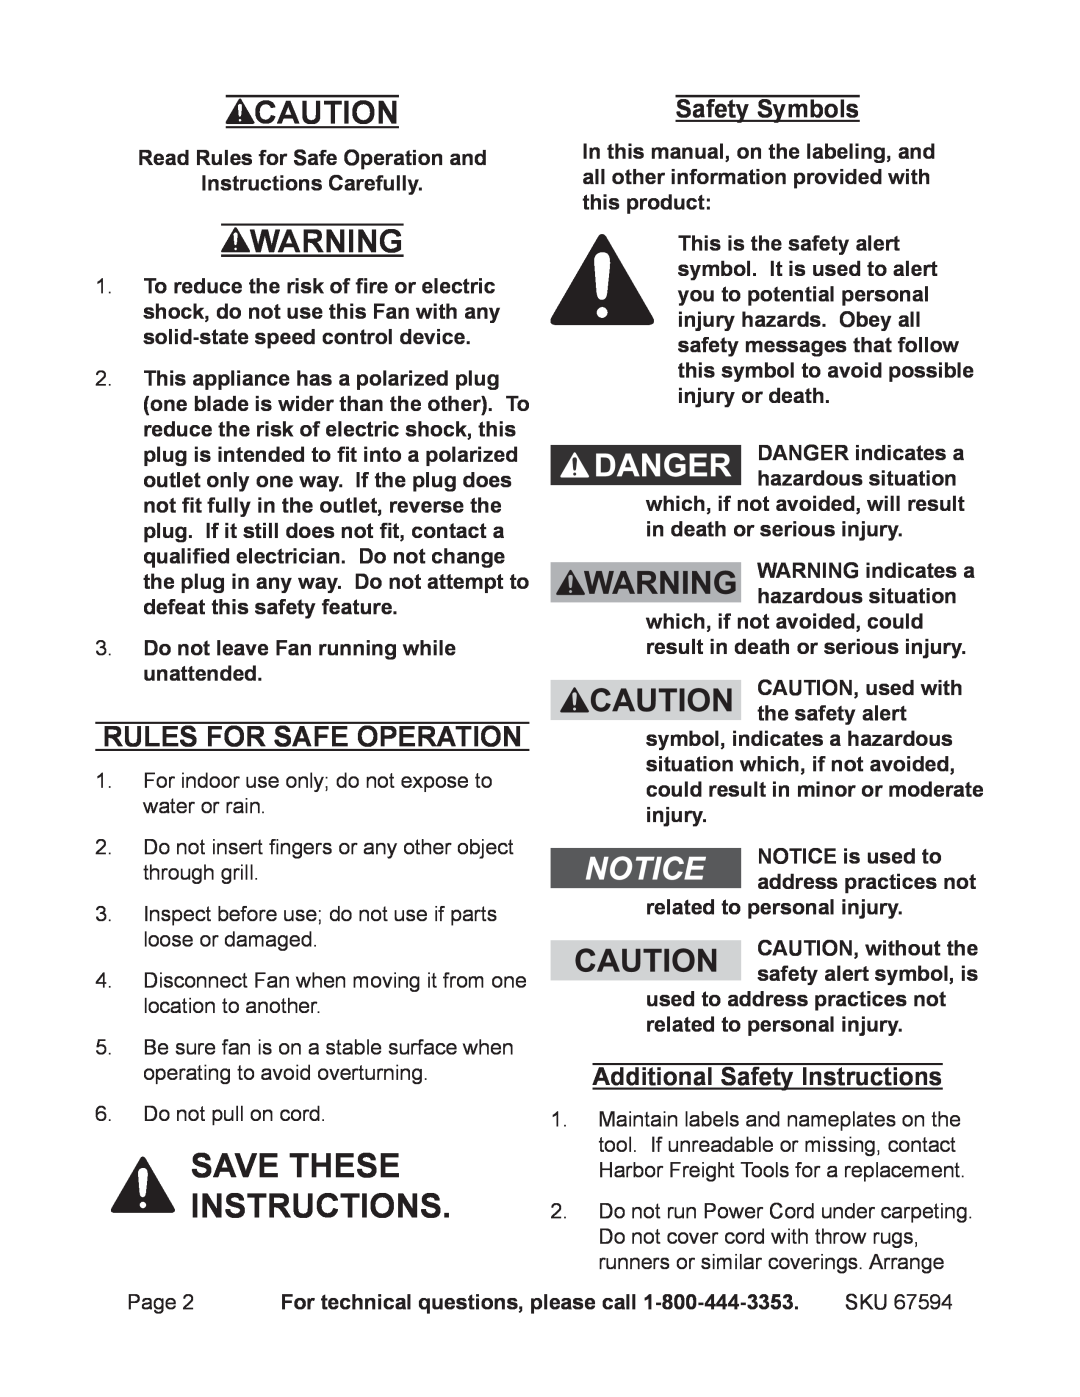 Chicago Electric 67594 Save these instructions, Rules For Safe Operation, Additional Safety Instructions, Safety Symbols 